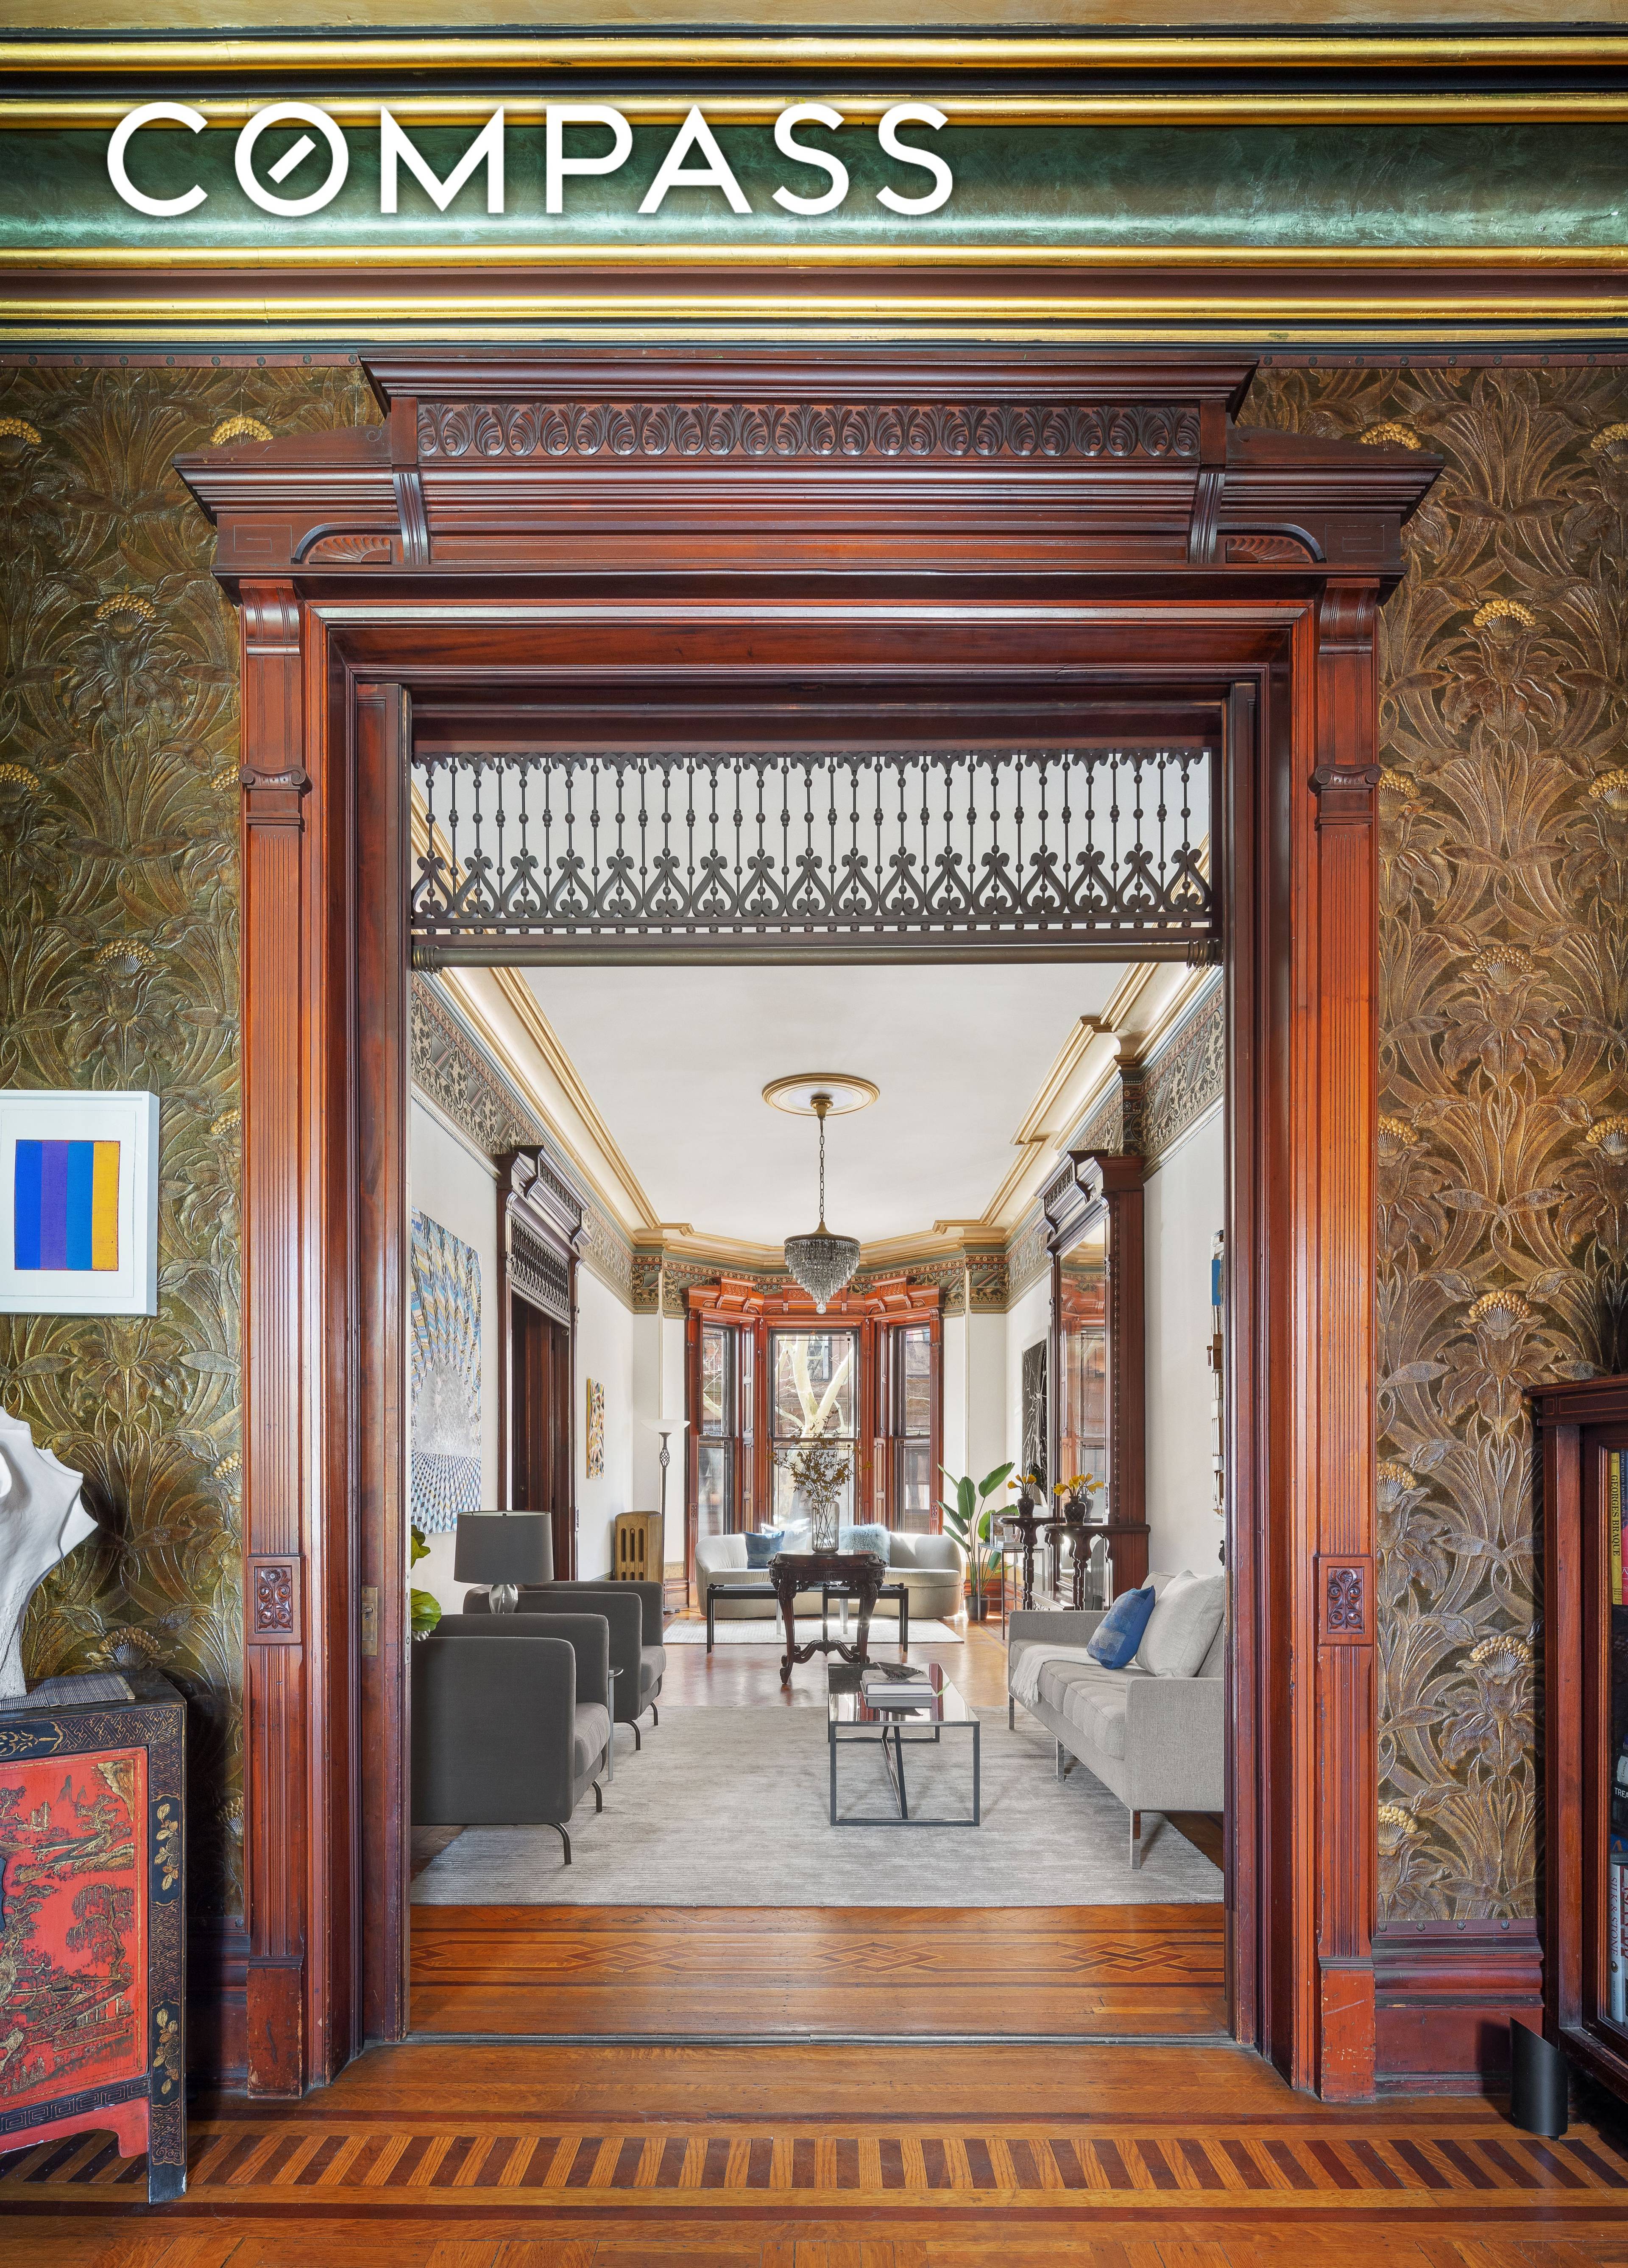 Enter this magnificent brownstone, and you will immediately be captivated by the 11 foot high ceilings on the parlor floor.